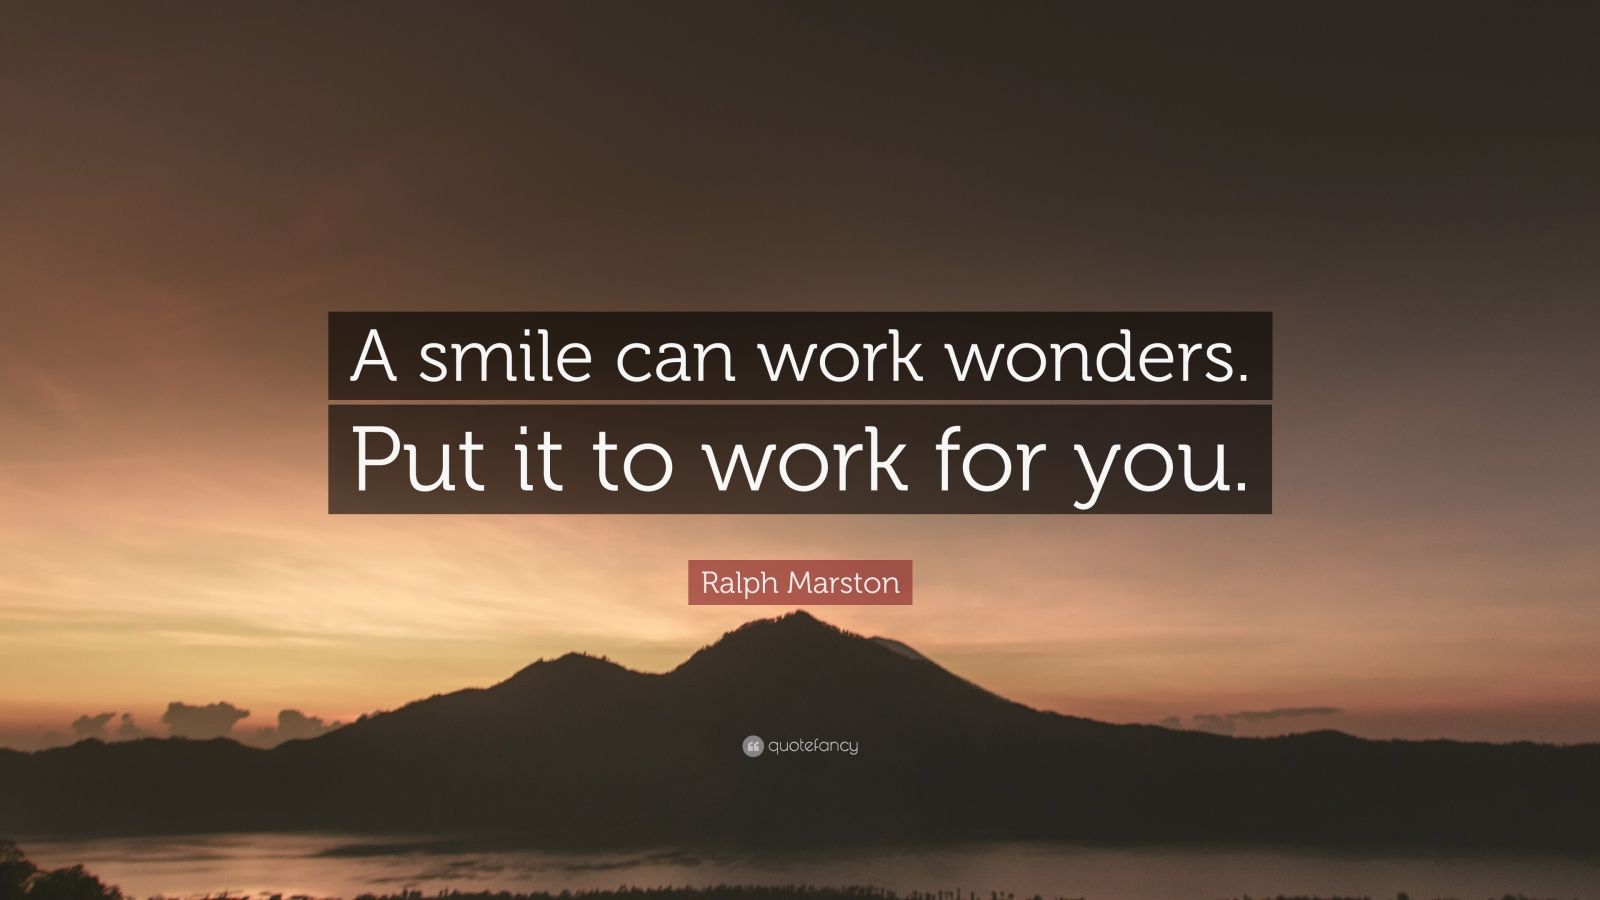 Ralph Marston Quote “A smile can work wonders. Put it to